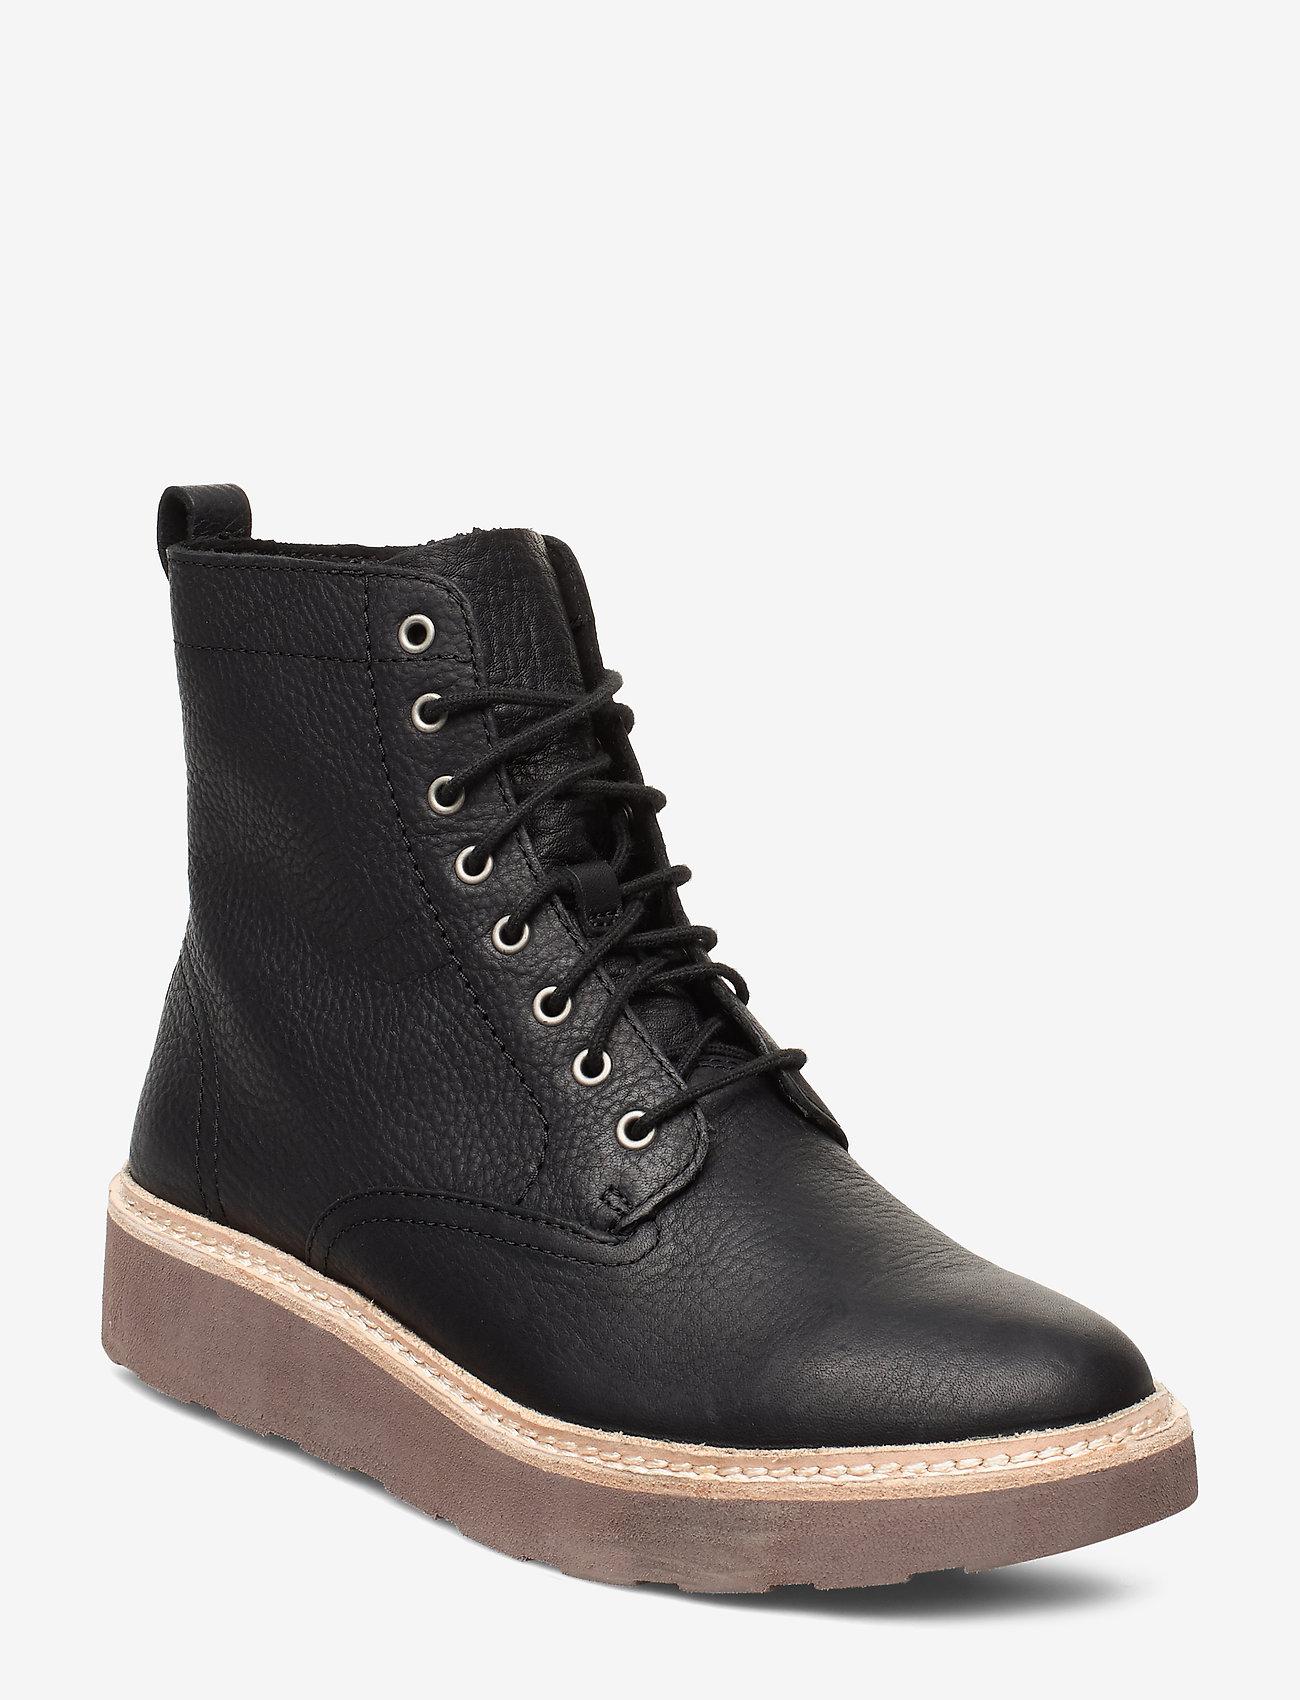 clarks flat boots